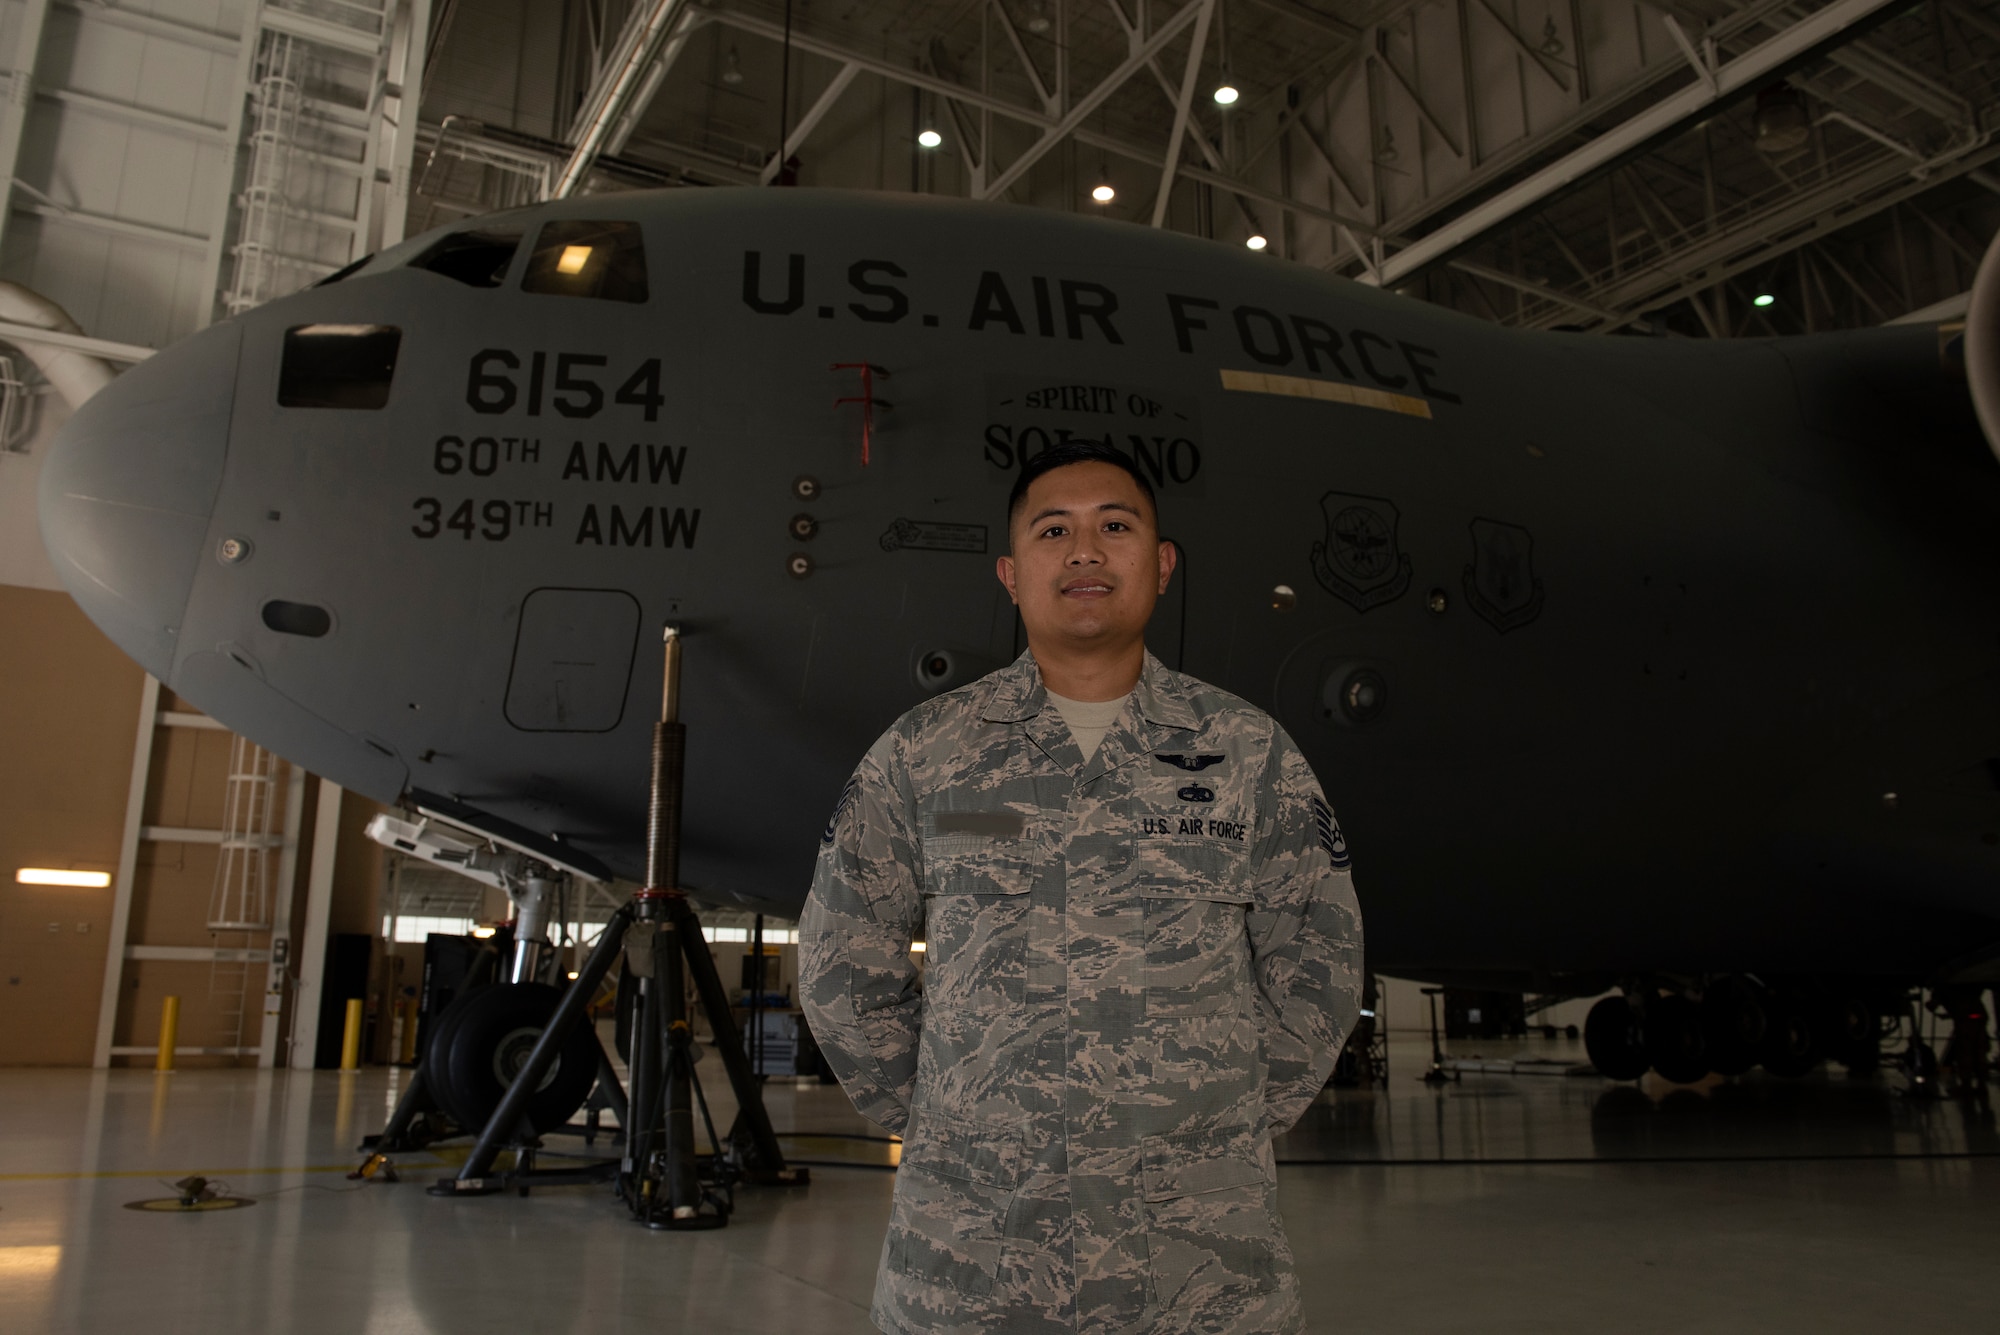 U.S. Air Force Tech. Sgt. Ron, 860th Aircraft Maintenance Squadron flight line expediter, stands in front of a C-17 Globemaster III July 23, 2019, at Travis Air Force Base, California. Ron completed remote pilot aircraft training July 12 and is one of the few enlisted Airmen the Air Force selected to serve as pilots. Prior to being selected to become a pilot, Ron served as a C-17 flying crew chief. This photo has been altered for security purposes by blurring out the last name on the uniform. (U.S. Air Force photo by Tech. Sgt. James Hodgman)